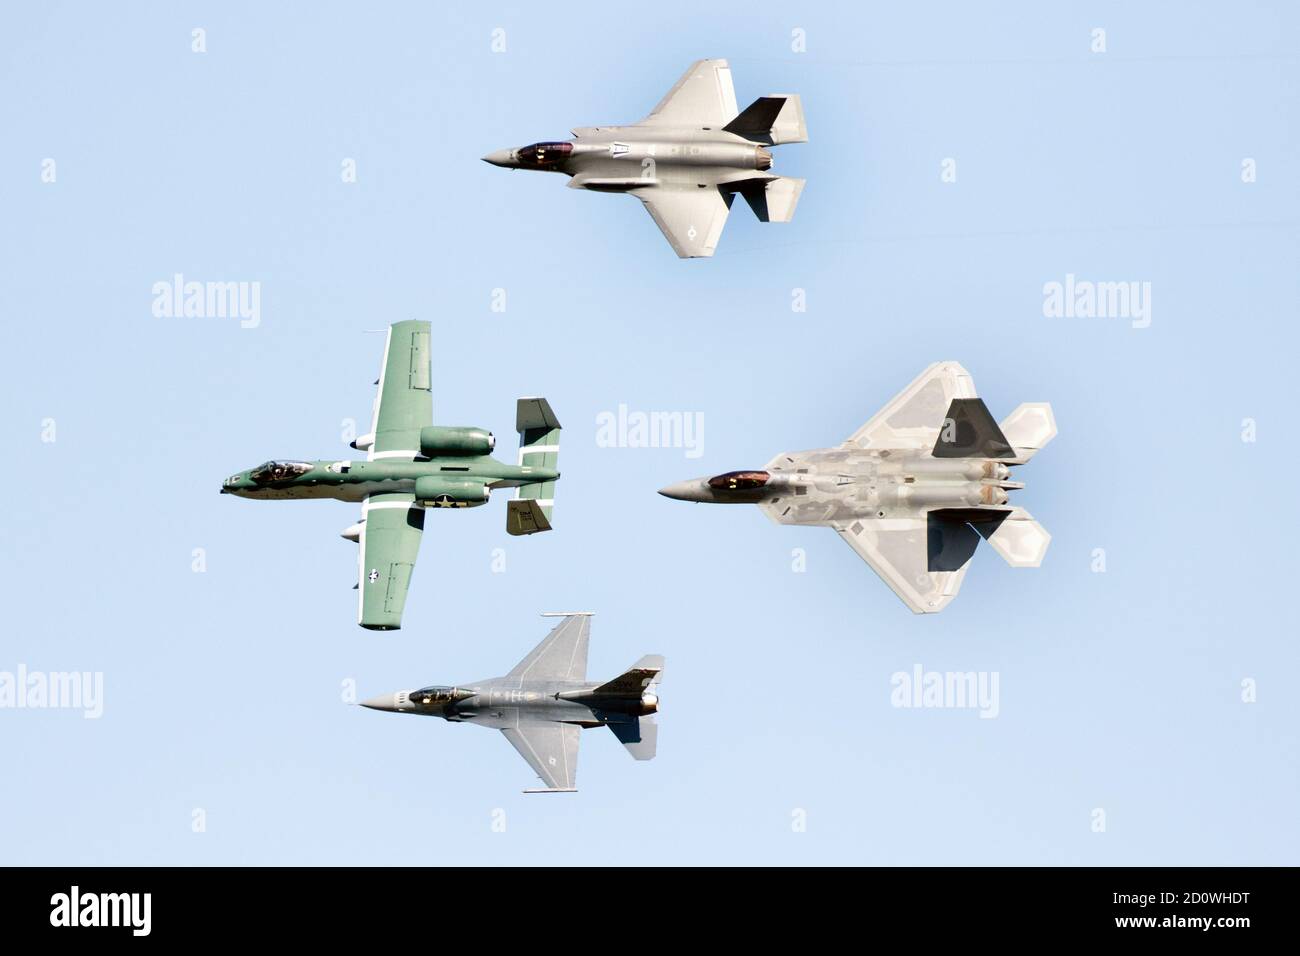 One of a kind formation flight including A-10, F-16, F-35 and F-22 at Airshow London Skydrive 2020, in London, Ontario, Canada. Stock Photo